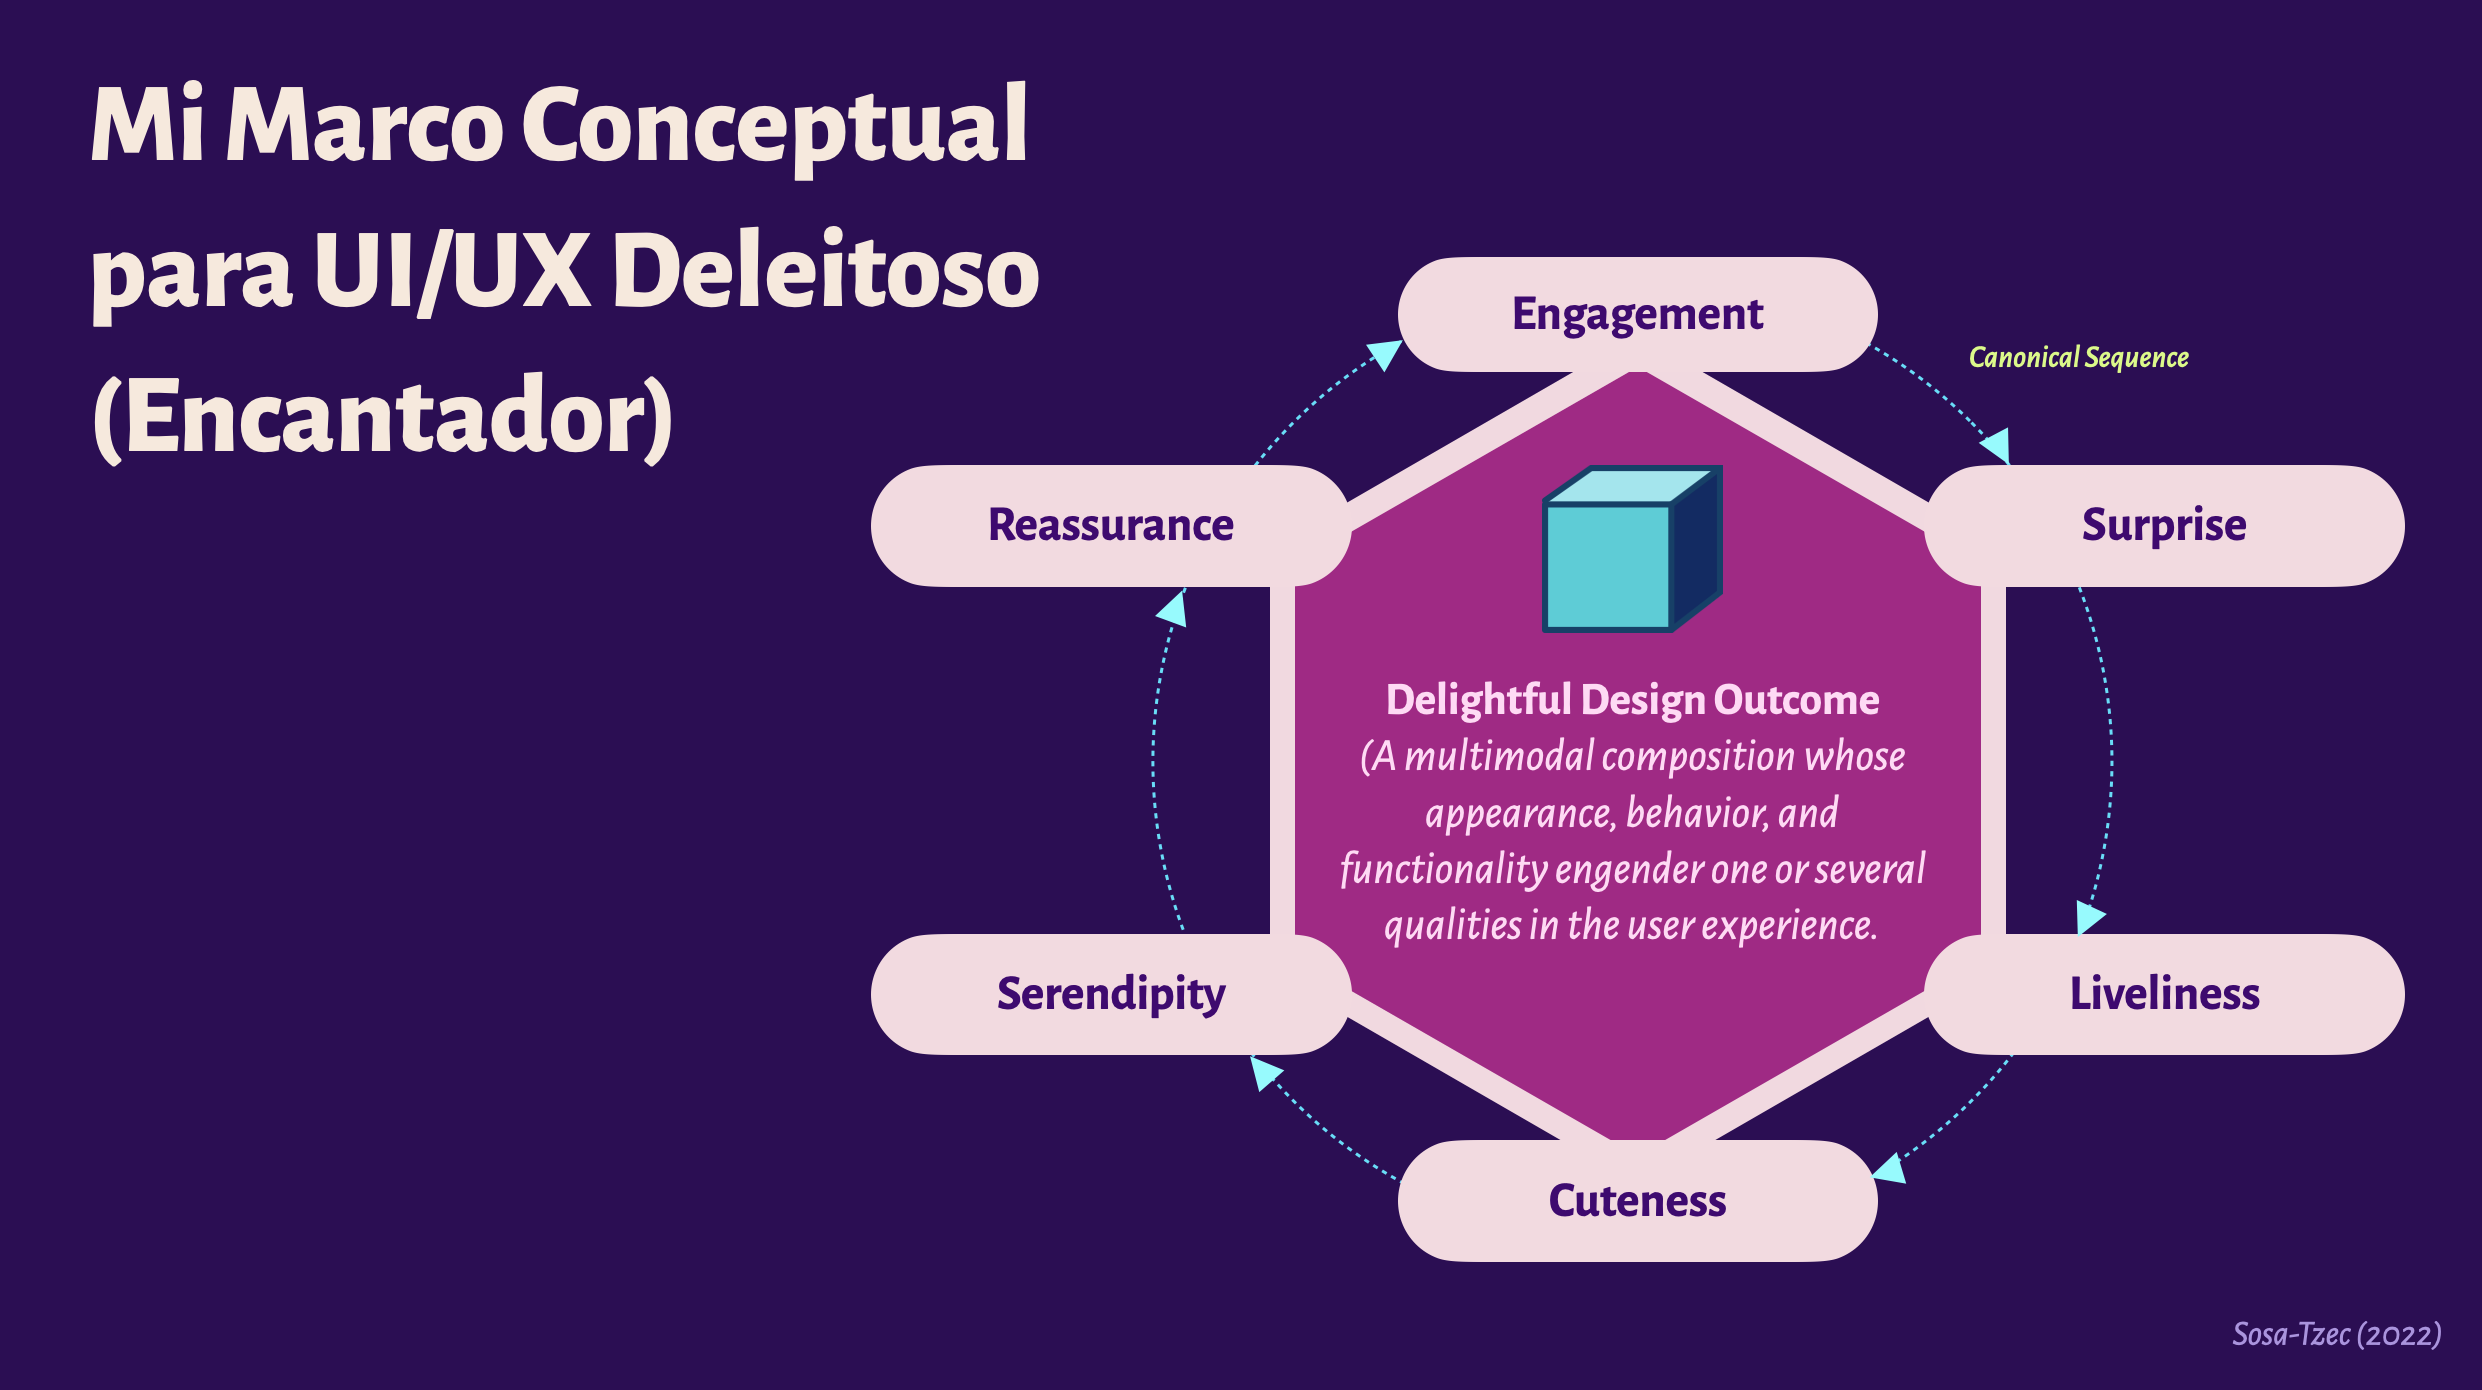 Omar Sosa-Tzec's framework for delightful user experience and interfaces